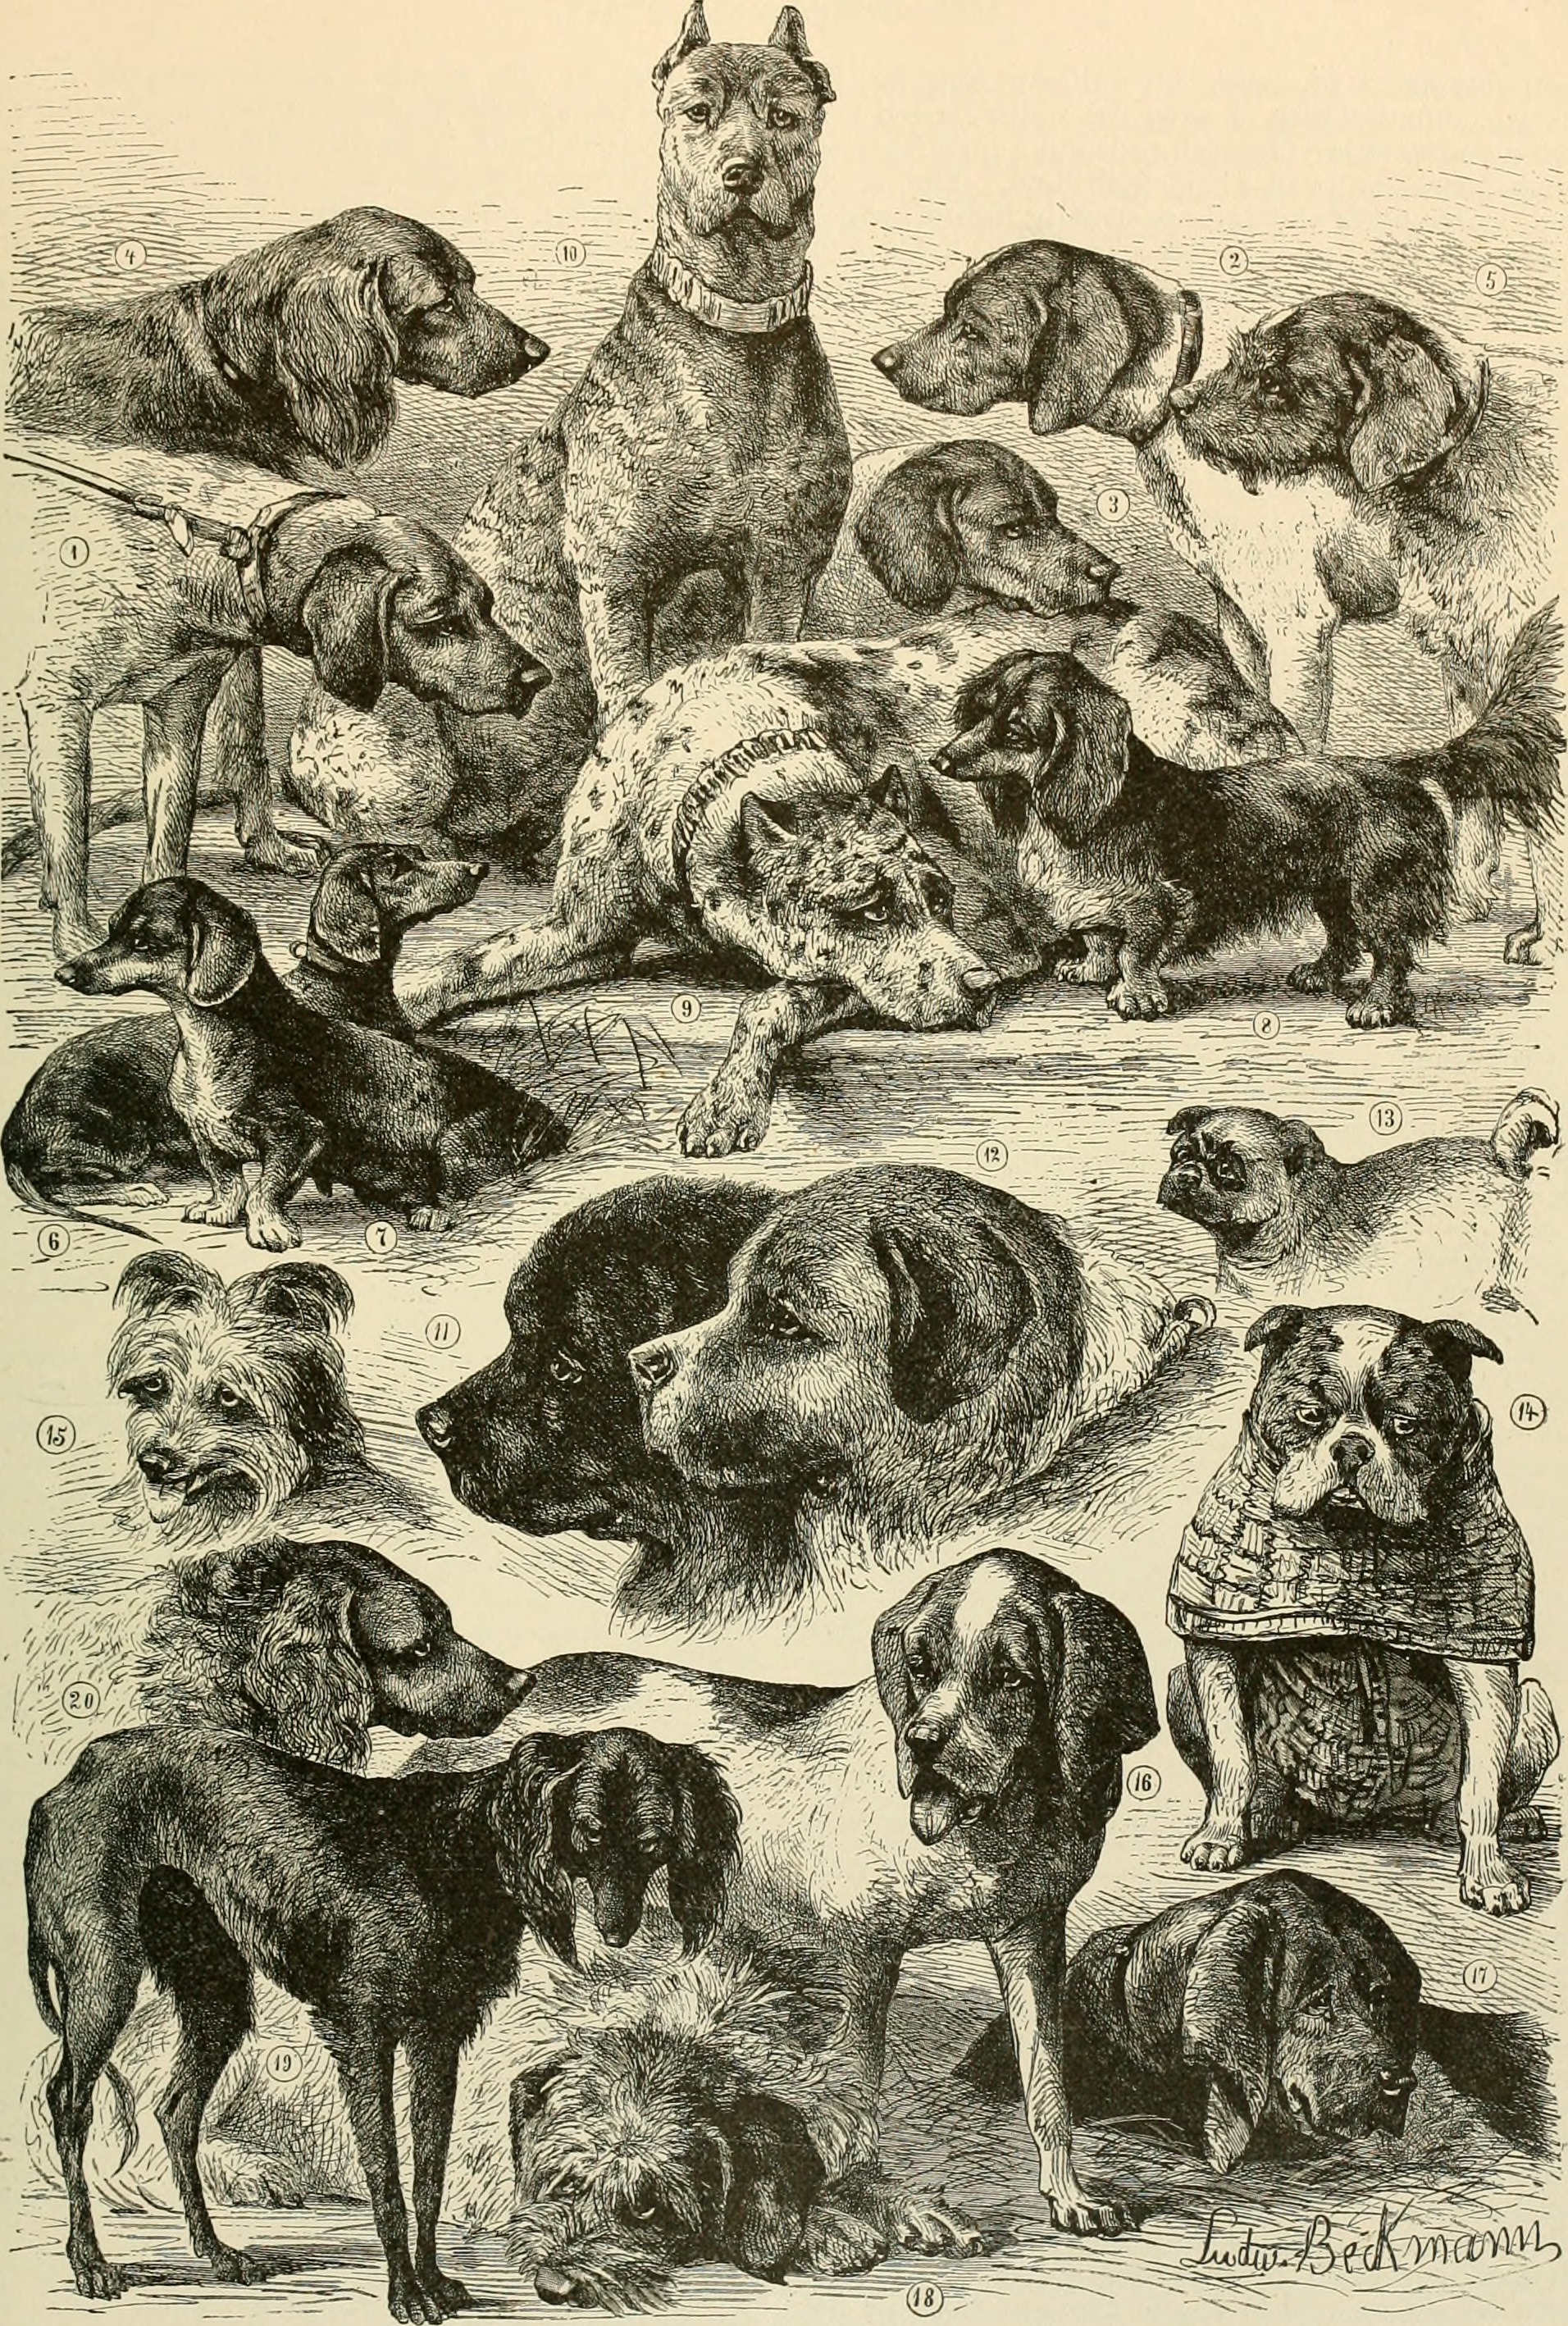 Companion Dogs Sometimes Appeared Alongside Deities in Celtic and Roman Mythology. Illustration from Brehm's Life of Animals, 1895. https://commons.wikimedia.org/wiki/File:Brehm%27s_Life_of_animals_-_a_complete_natural_history_for_popular_home_instruction_and_for_the_use_of_schools_(1895)_(20419028811).jpg